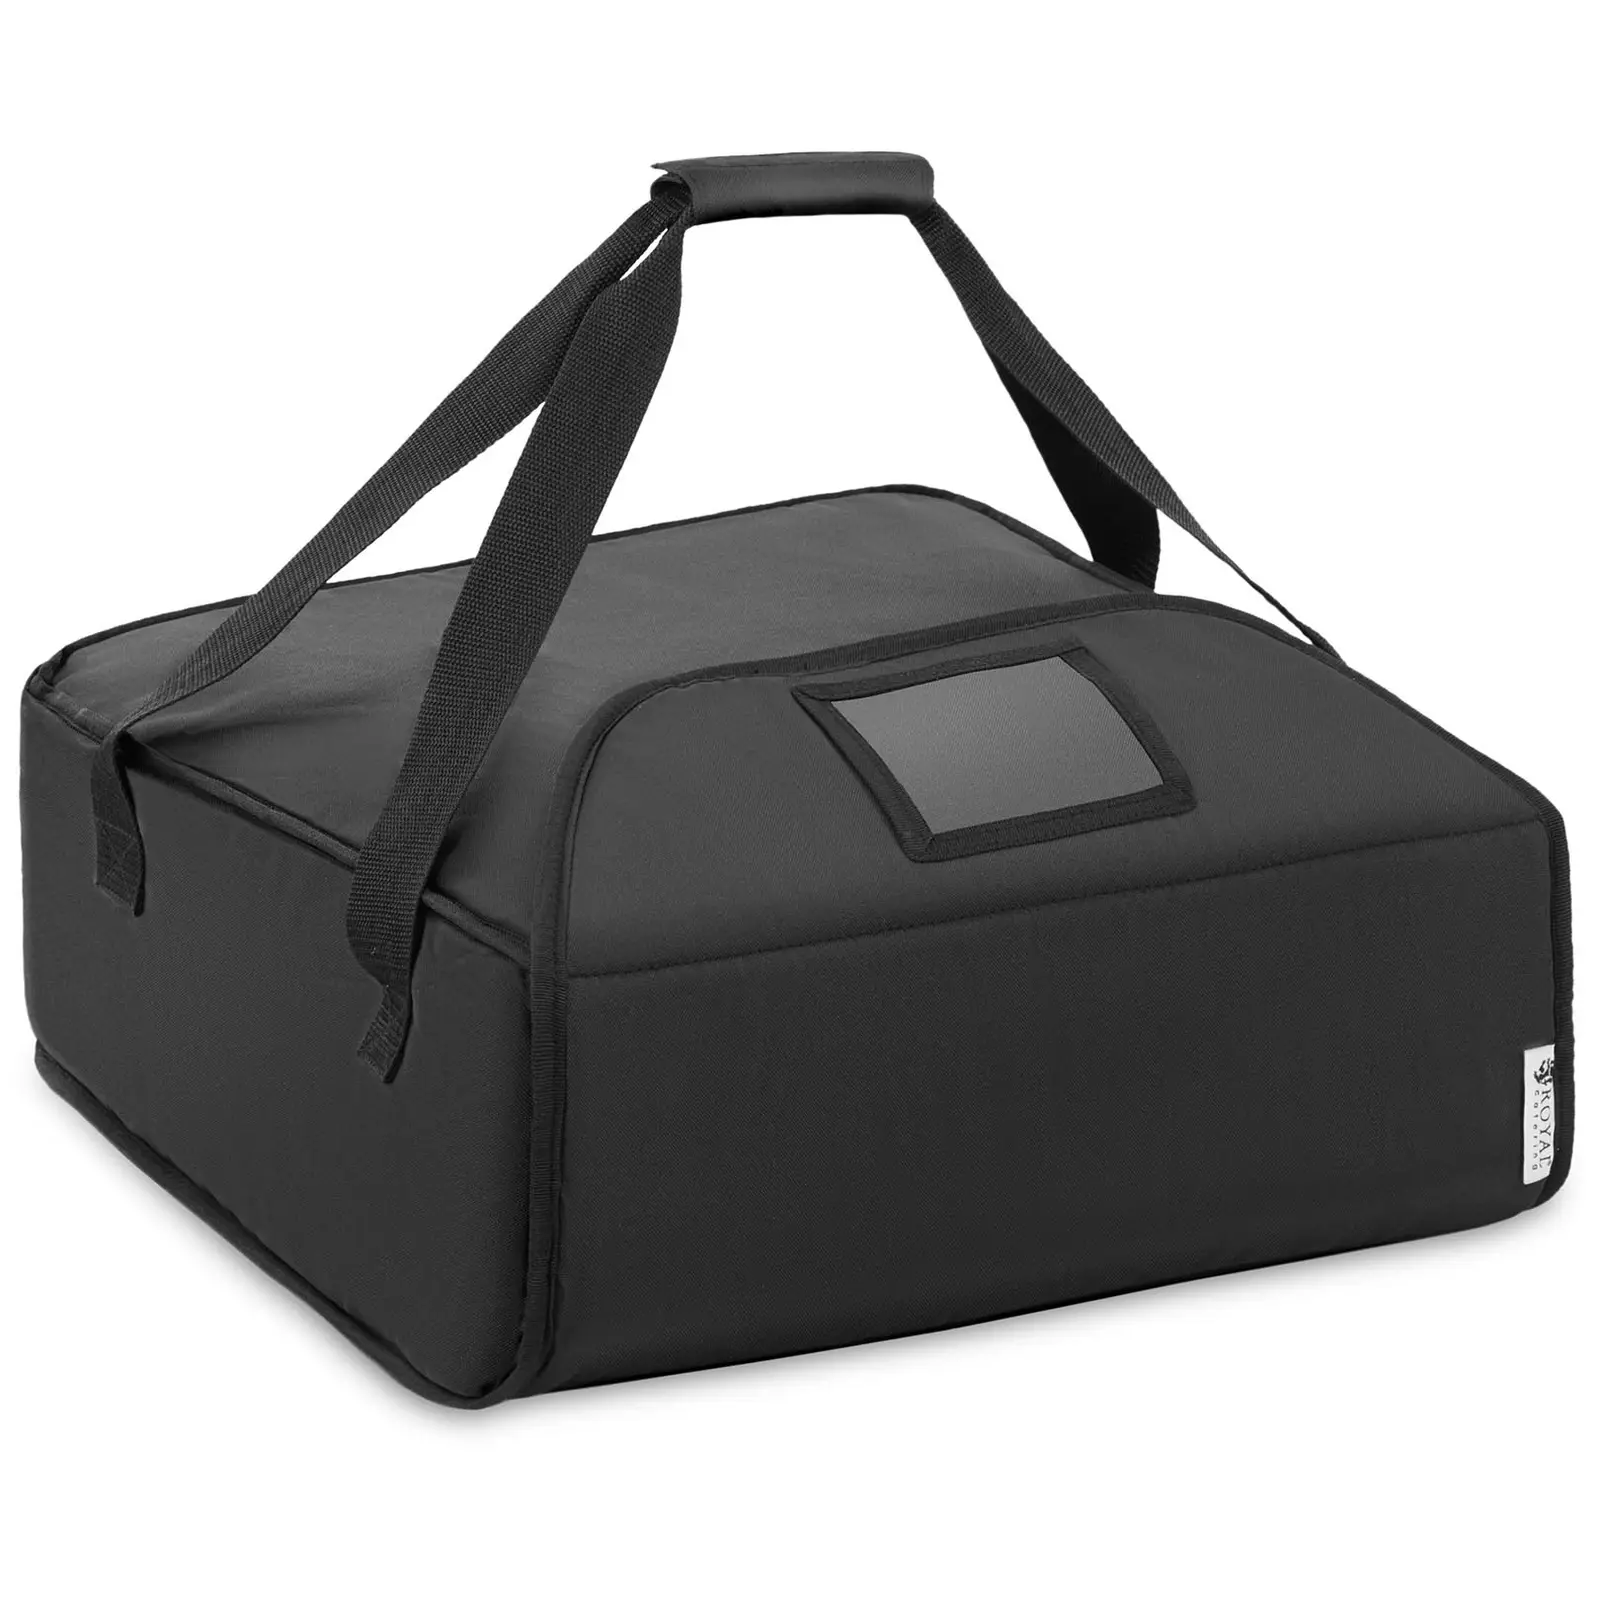 Pizzaliefertasche - 41 x 13 x 42.5 cm - Royal Catering